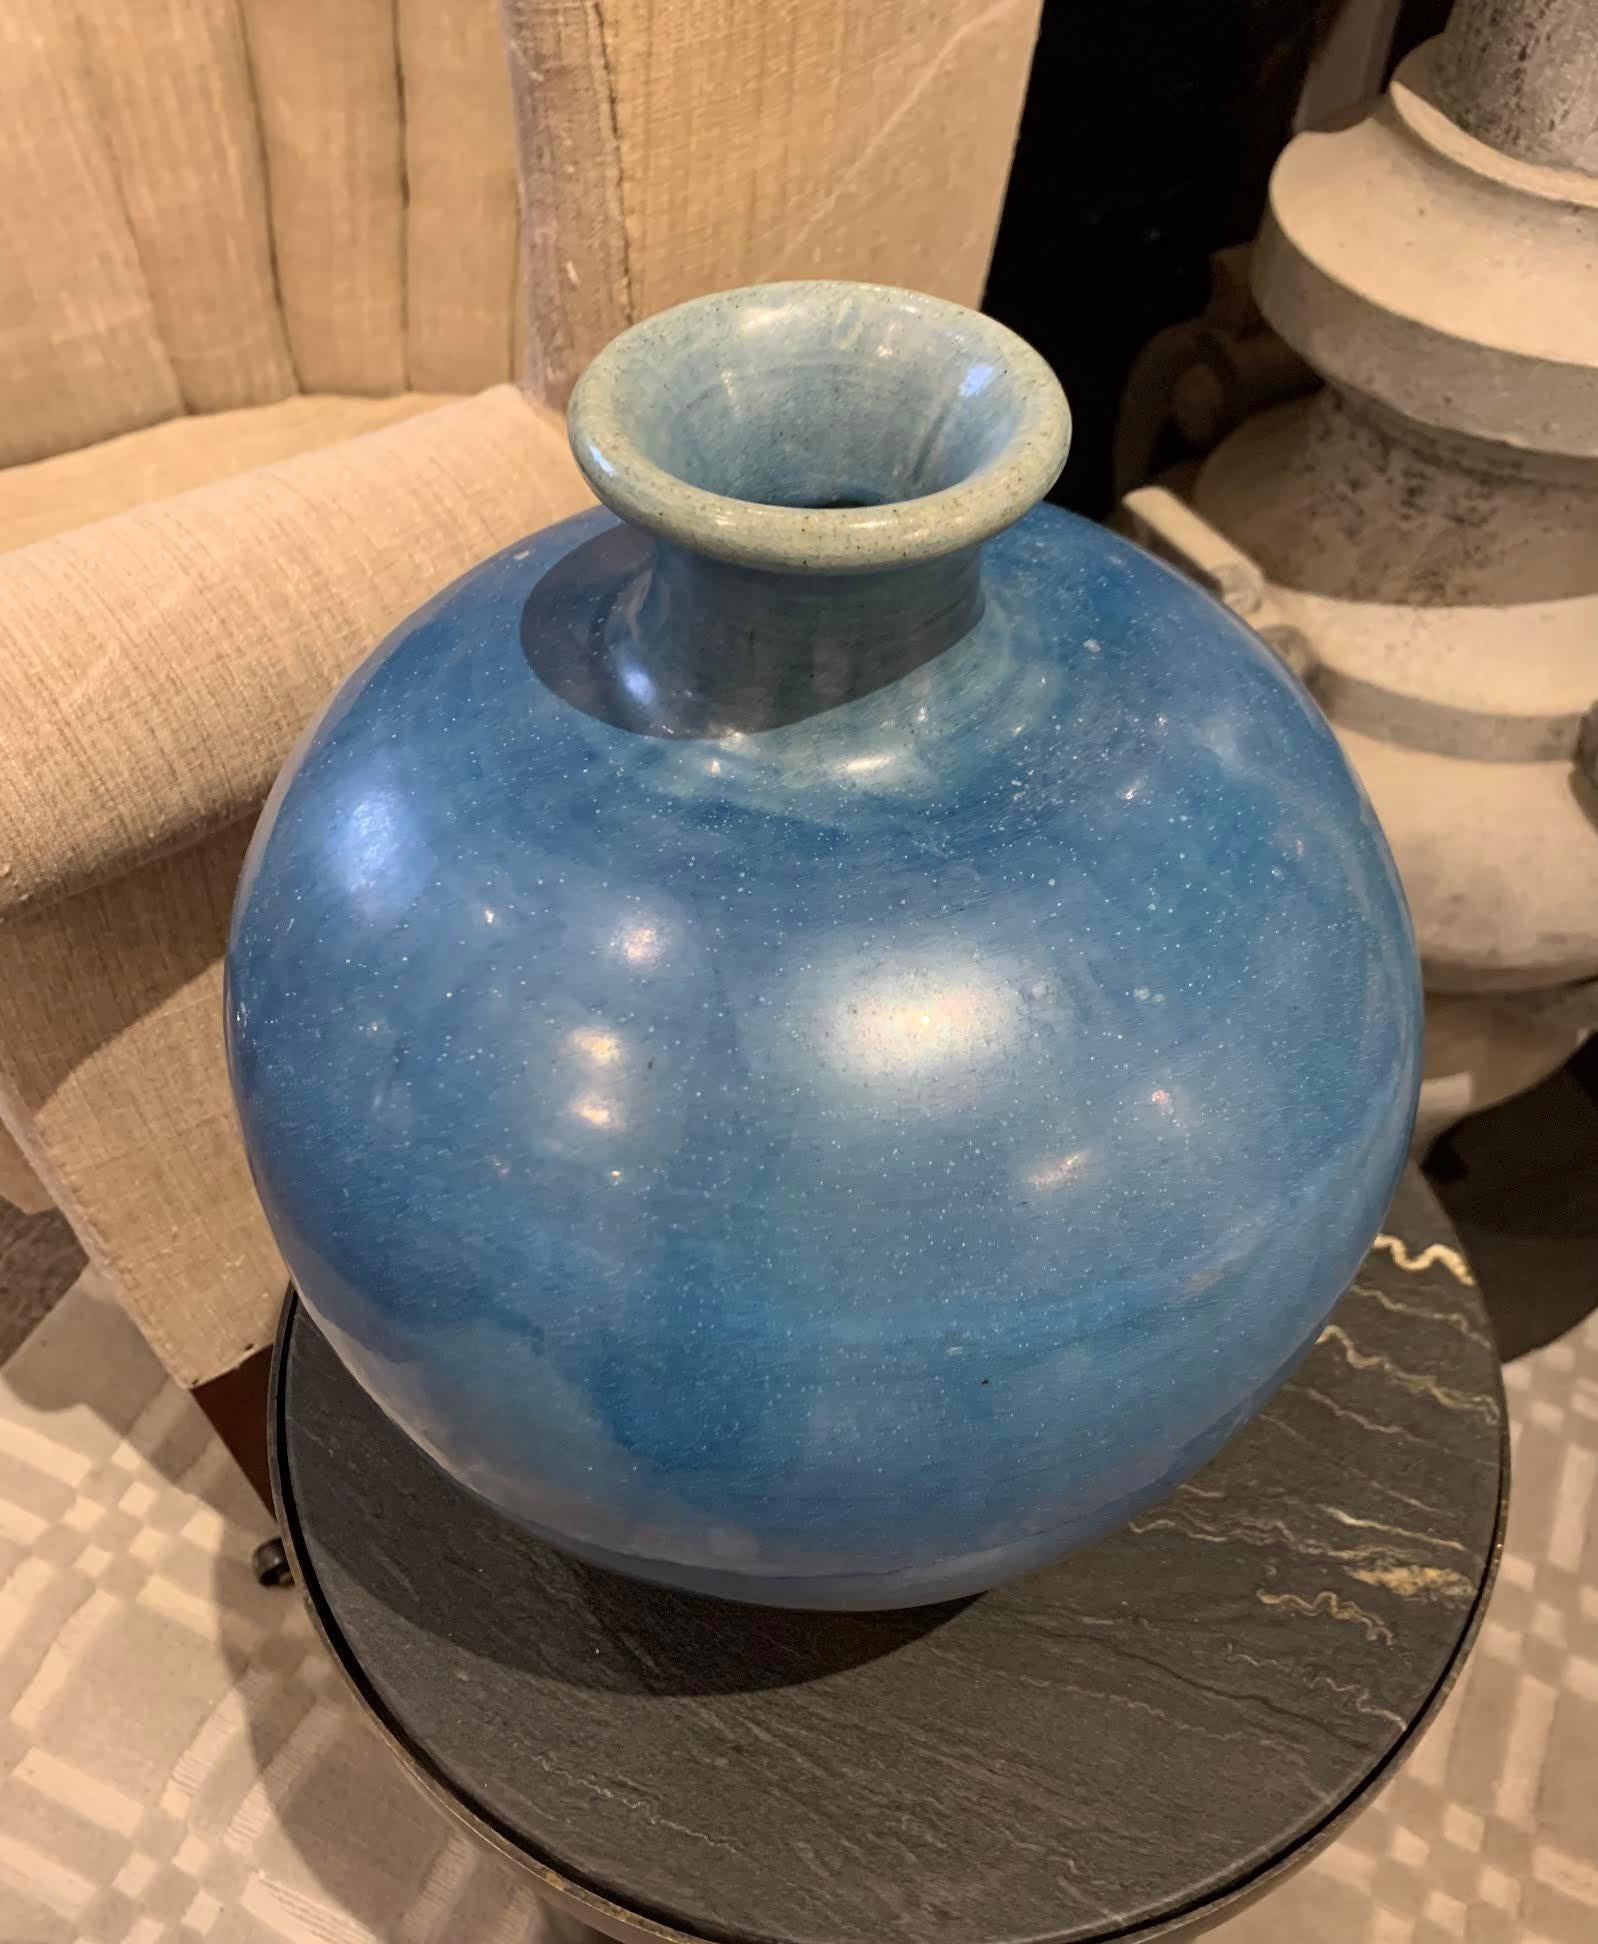 Contemporary Chinese deep blue glazed vase.
Thin spout and rounded base.

